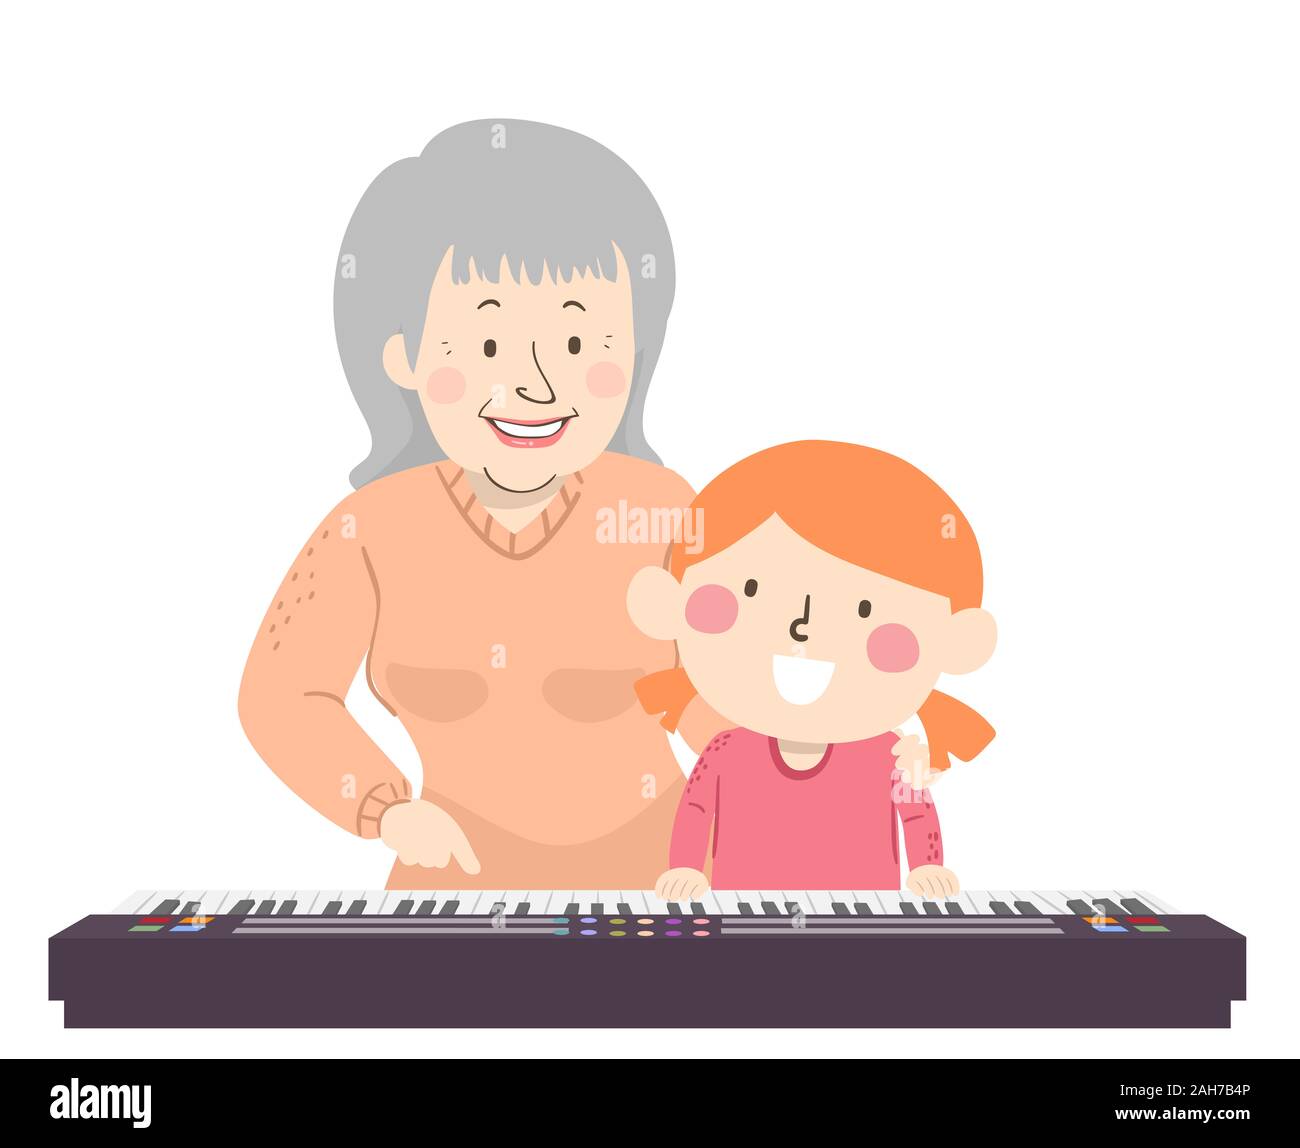 Illustration of a Senior Grandmother or Woman Playing the Keyboard with a  Kid Girl Stock Photo - Alamy